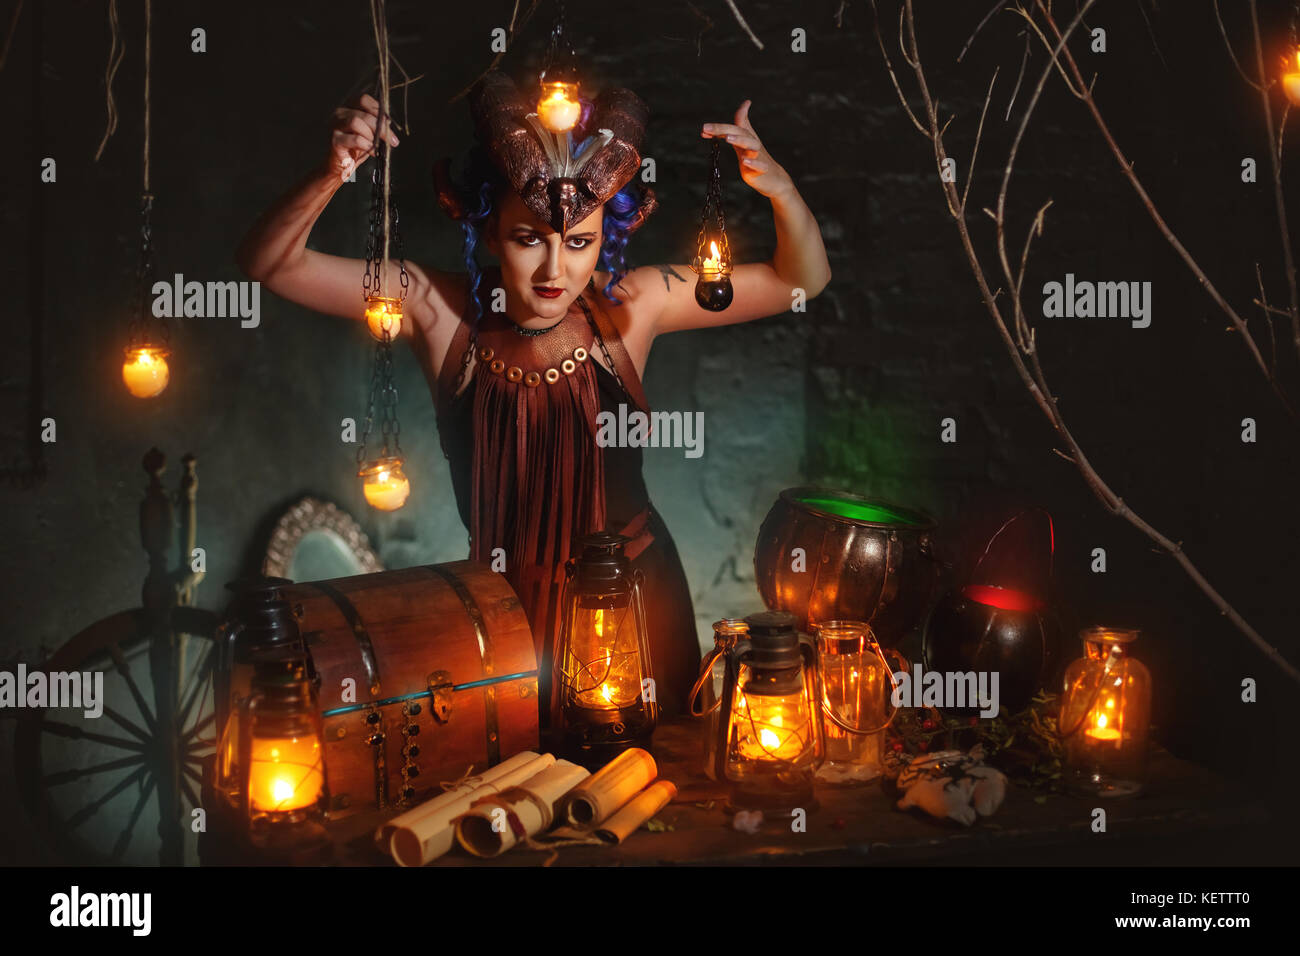 Young Witch Casts A Spell In A Dark Room Stock Photo